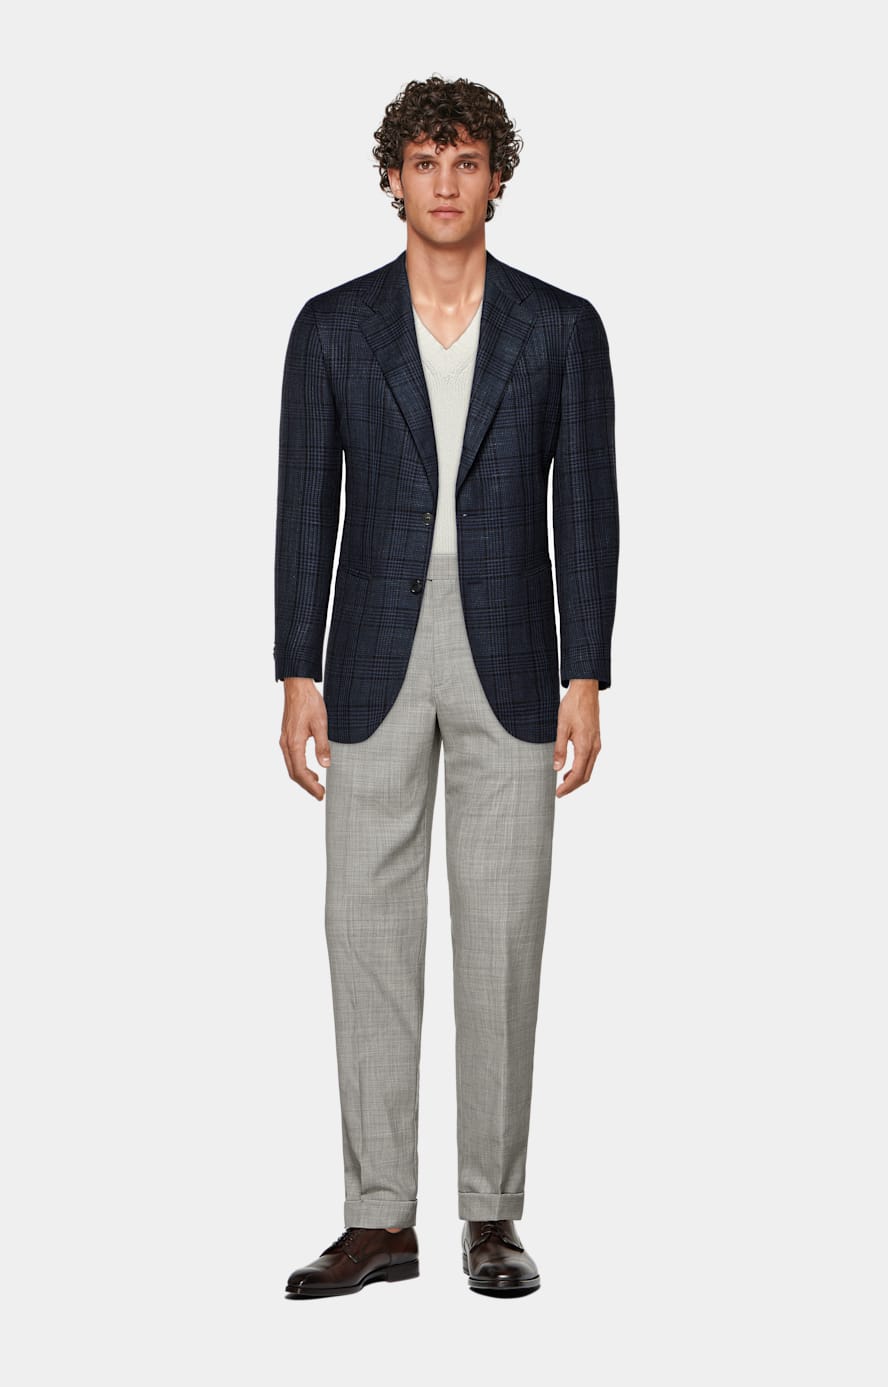 What pants should I wear with a gray blazer? - Quora